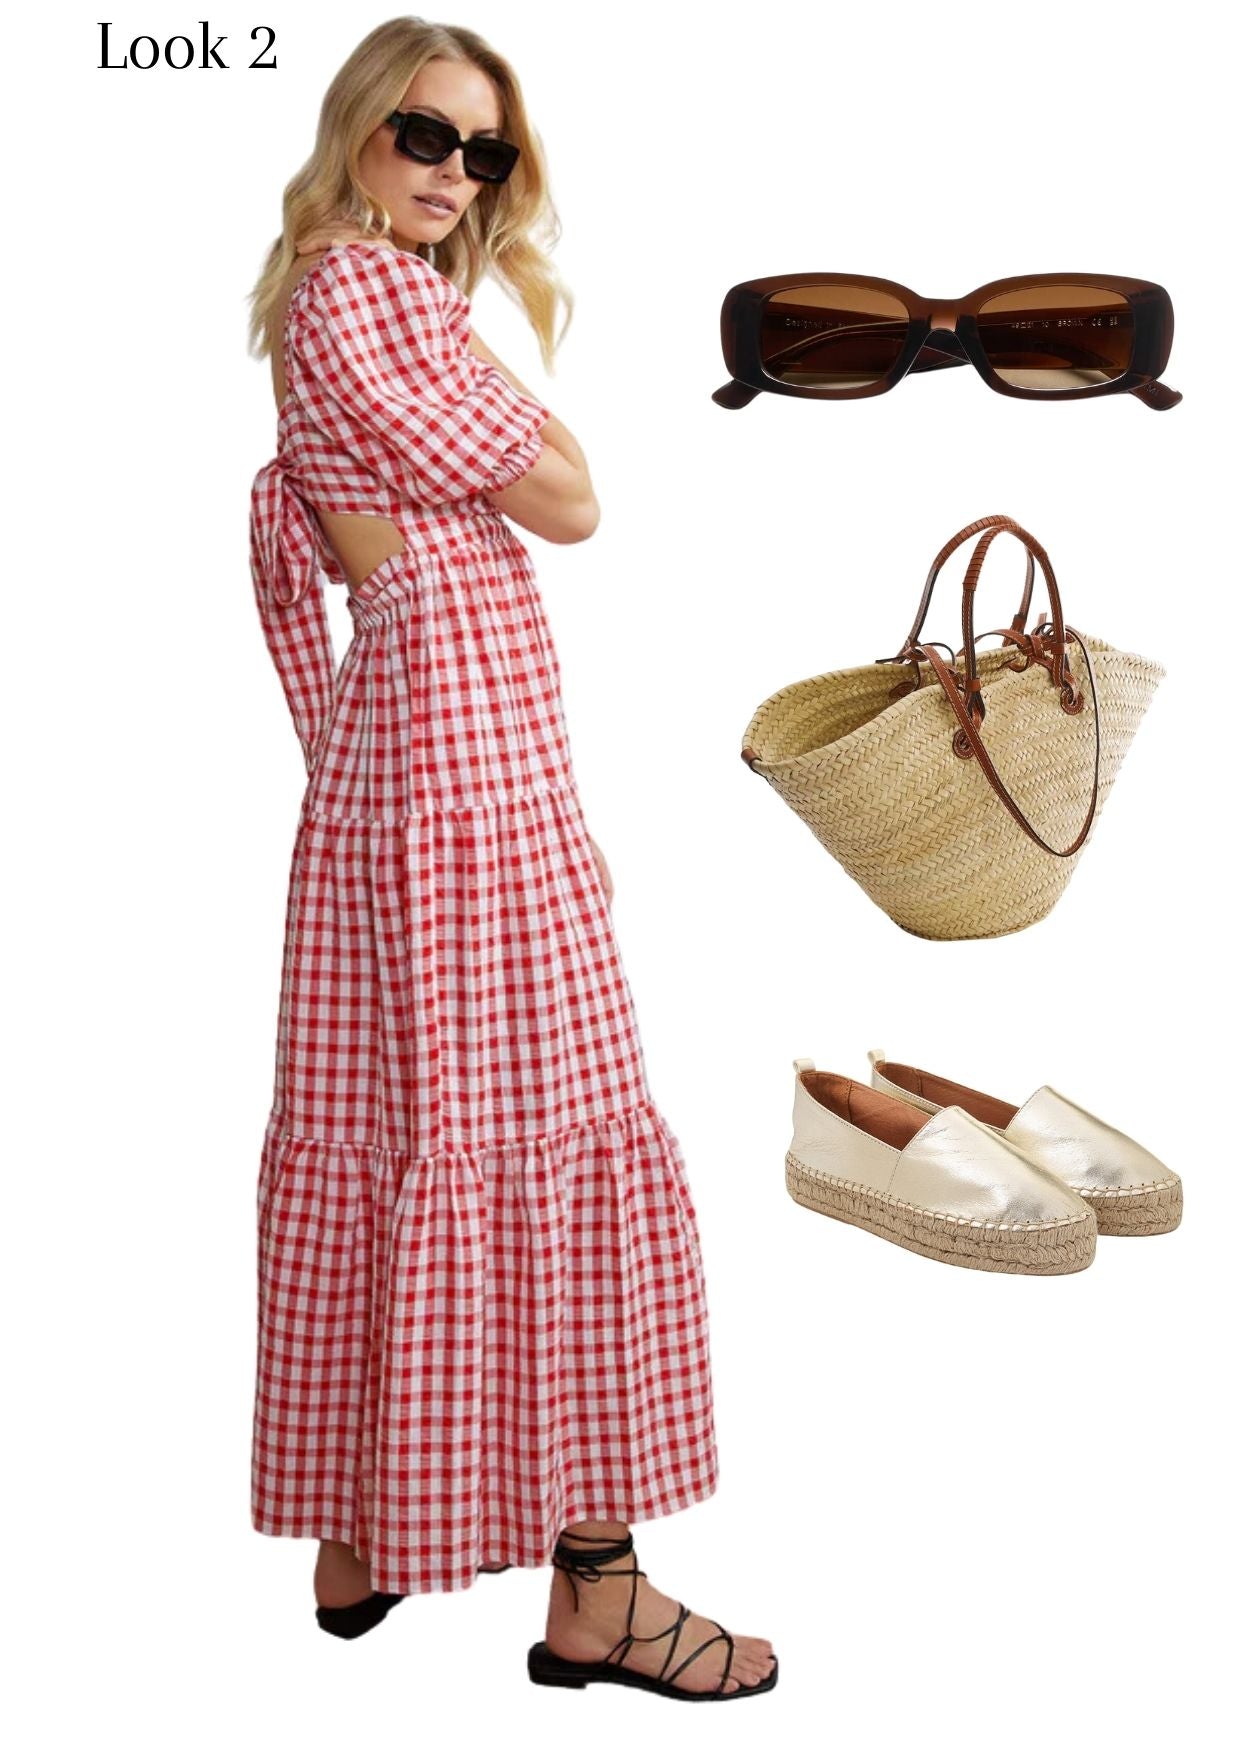 look 2: red and white gingham dress and accessories